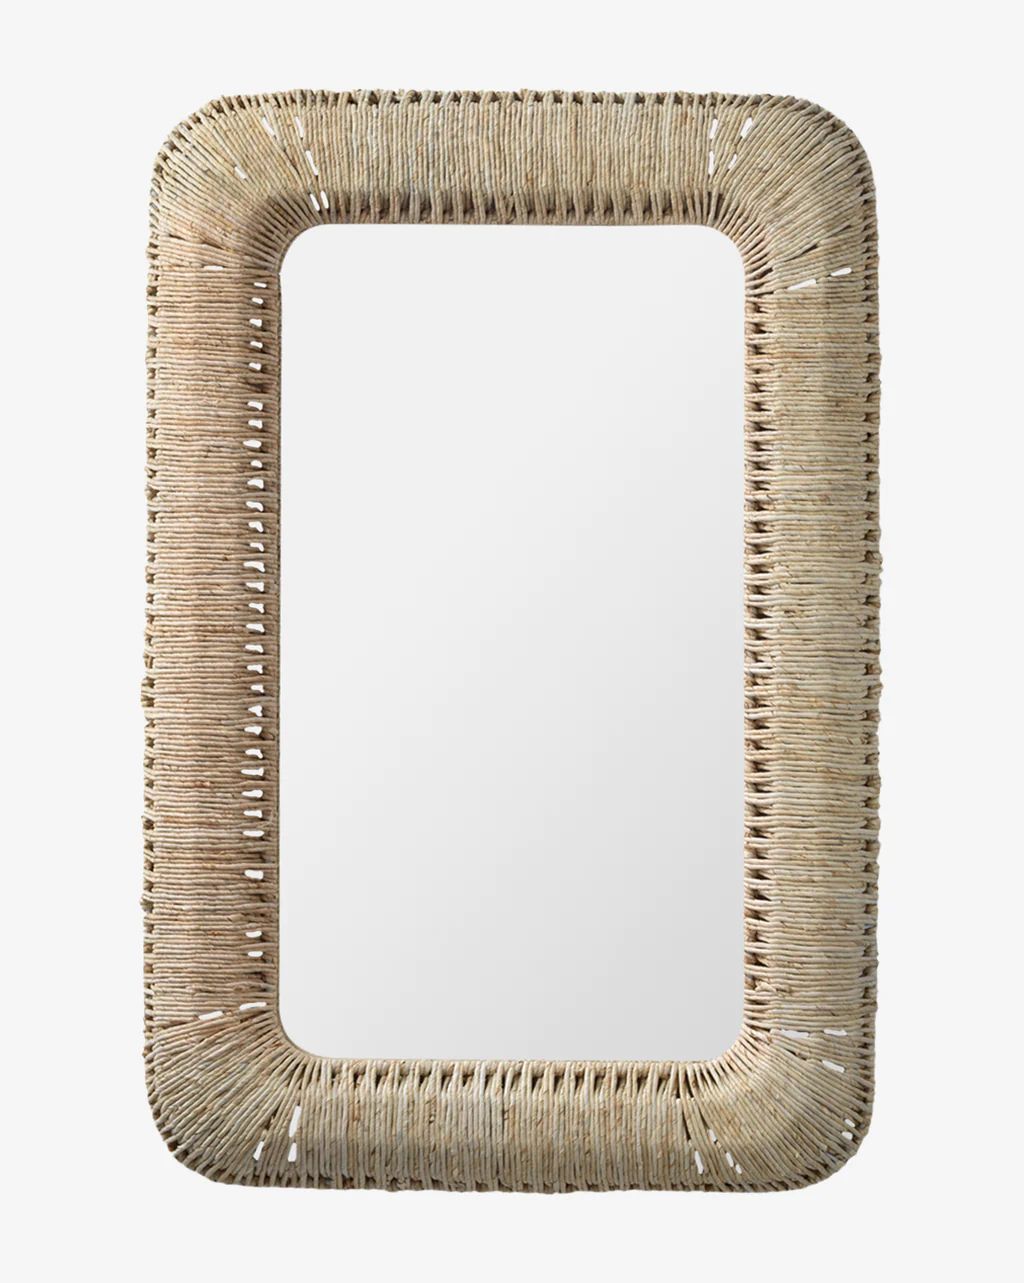 Mendelson Mirror | McGee & Co.